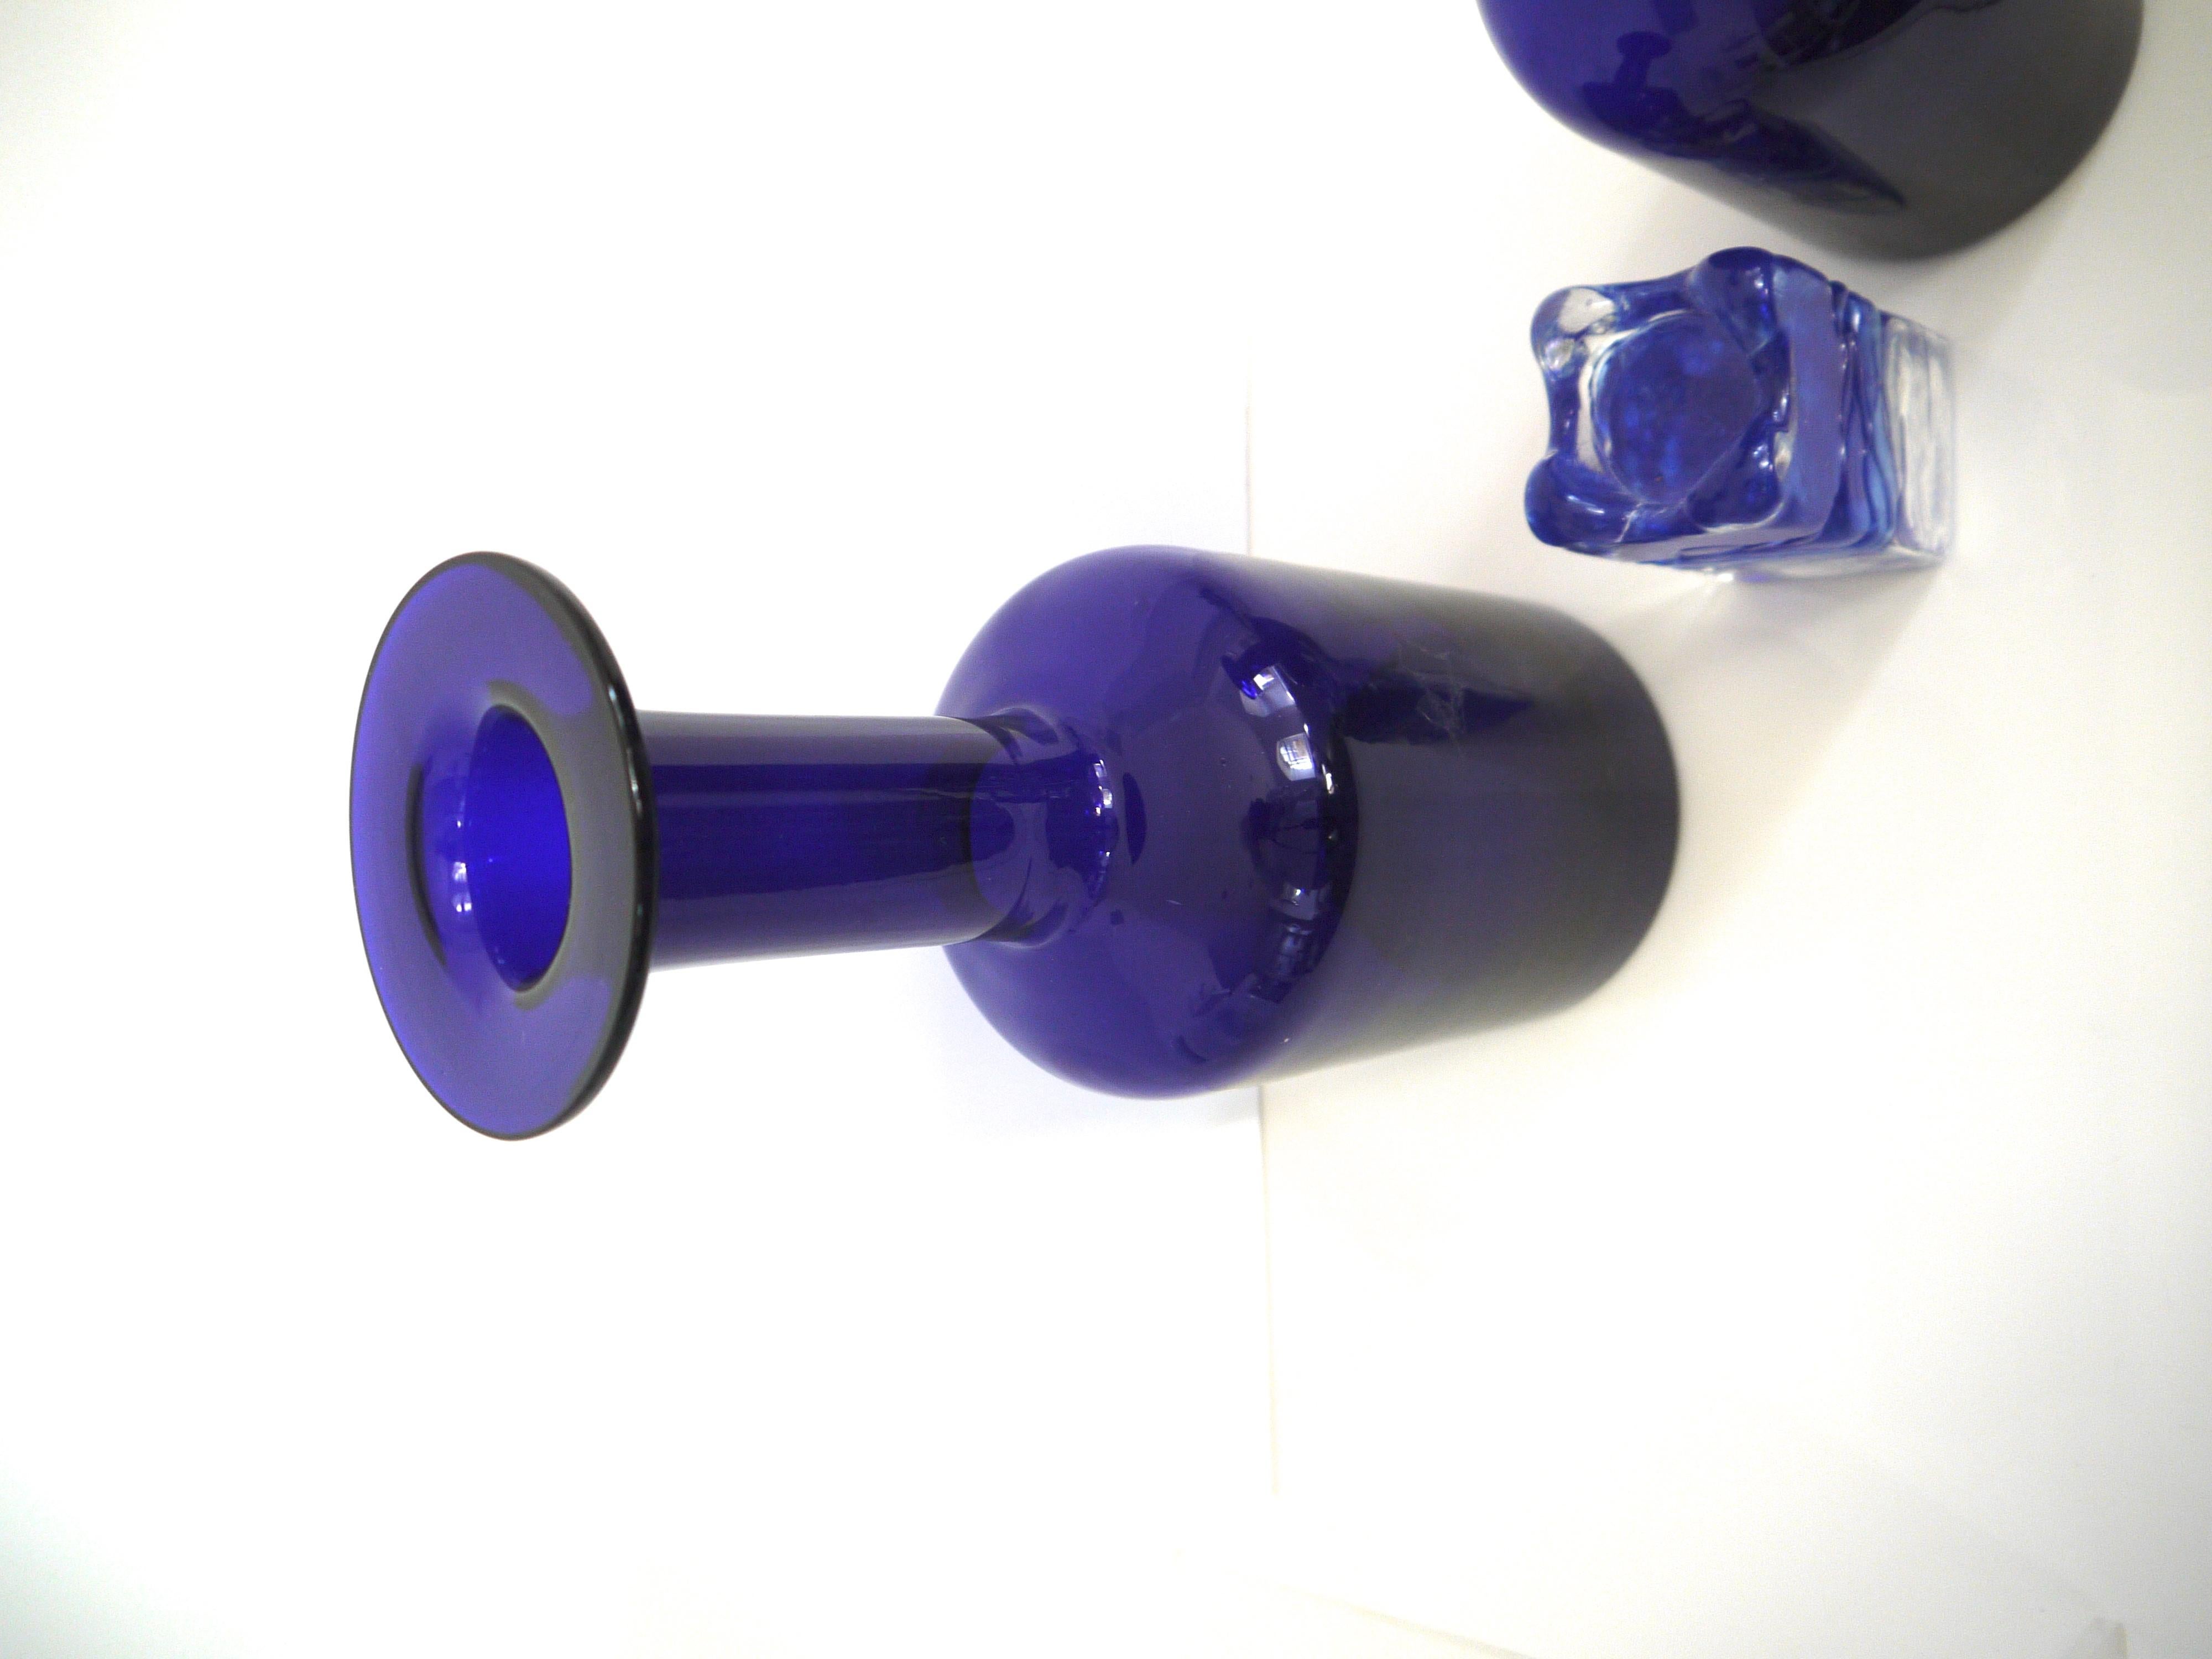 A pair of cobalt blue Gulvases by Otto Brauer based on a design by Per Lutken in 1958 for Holmegaard Kastrup
Styled with a candleholder by Ingrid Glasshutte.
The larger vase is 30 cms in height the small 25 cms.